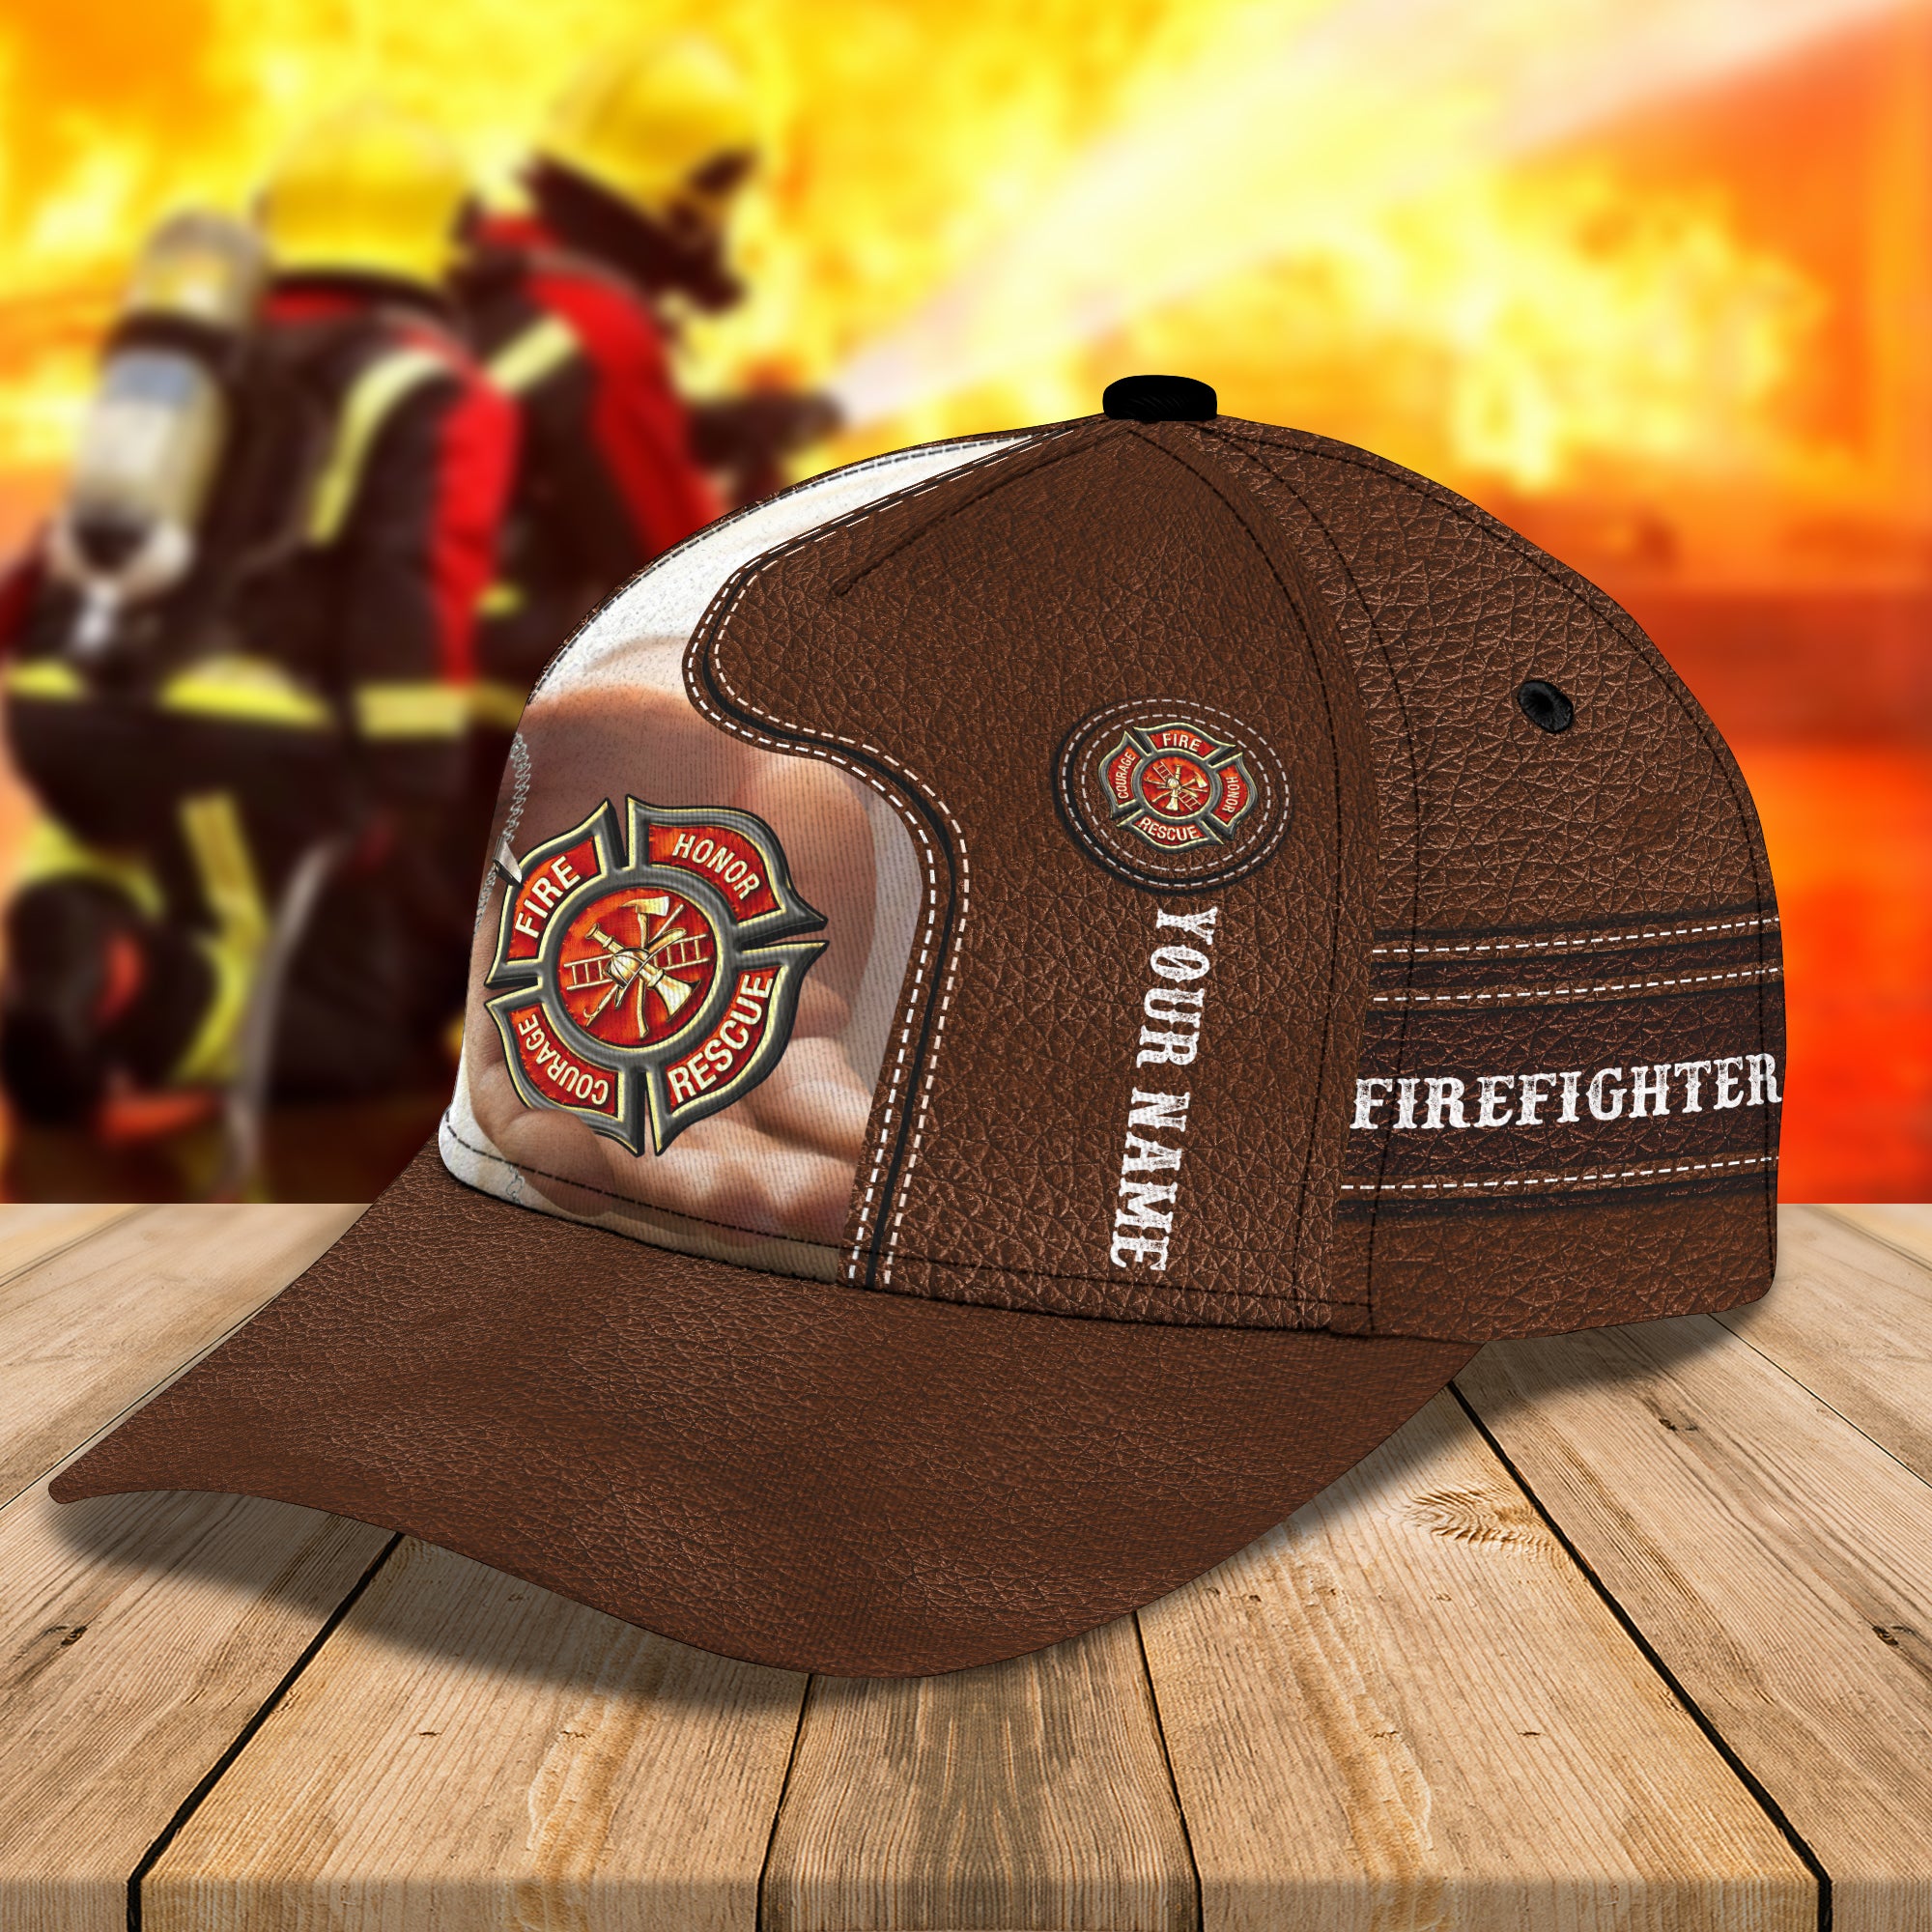 Firefighter - Personalized Name Cap 01 - Cv98